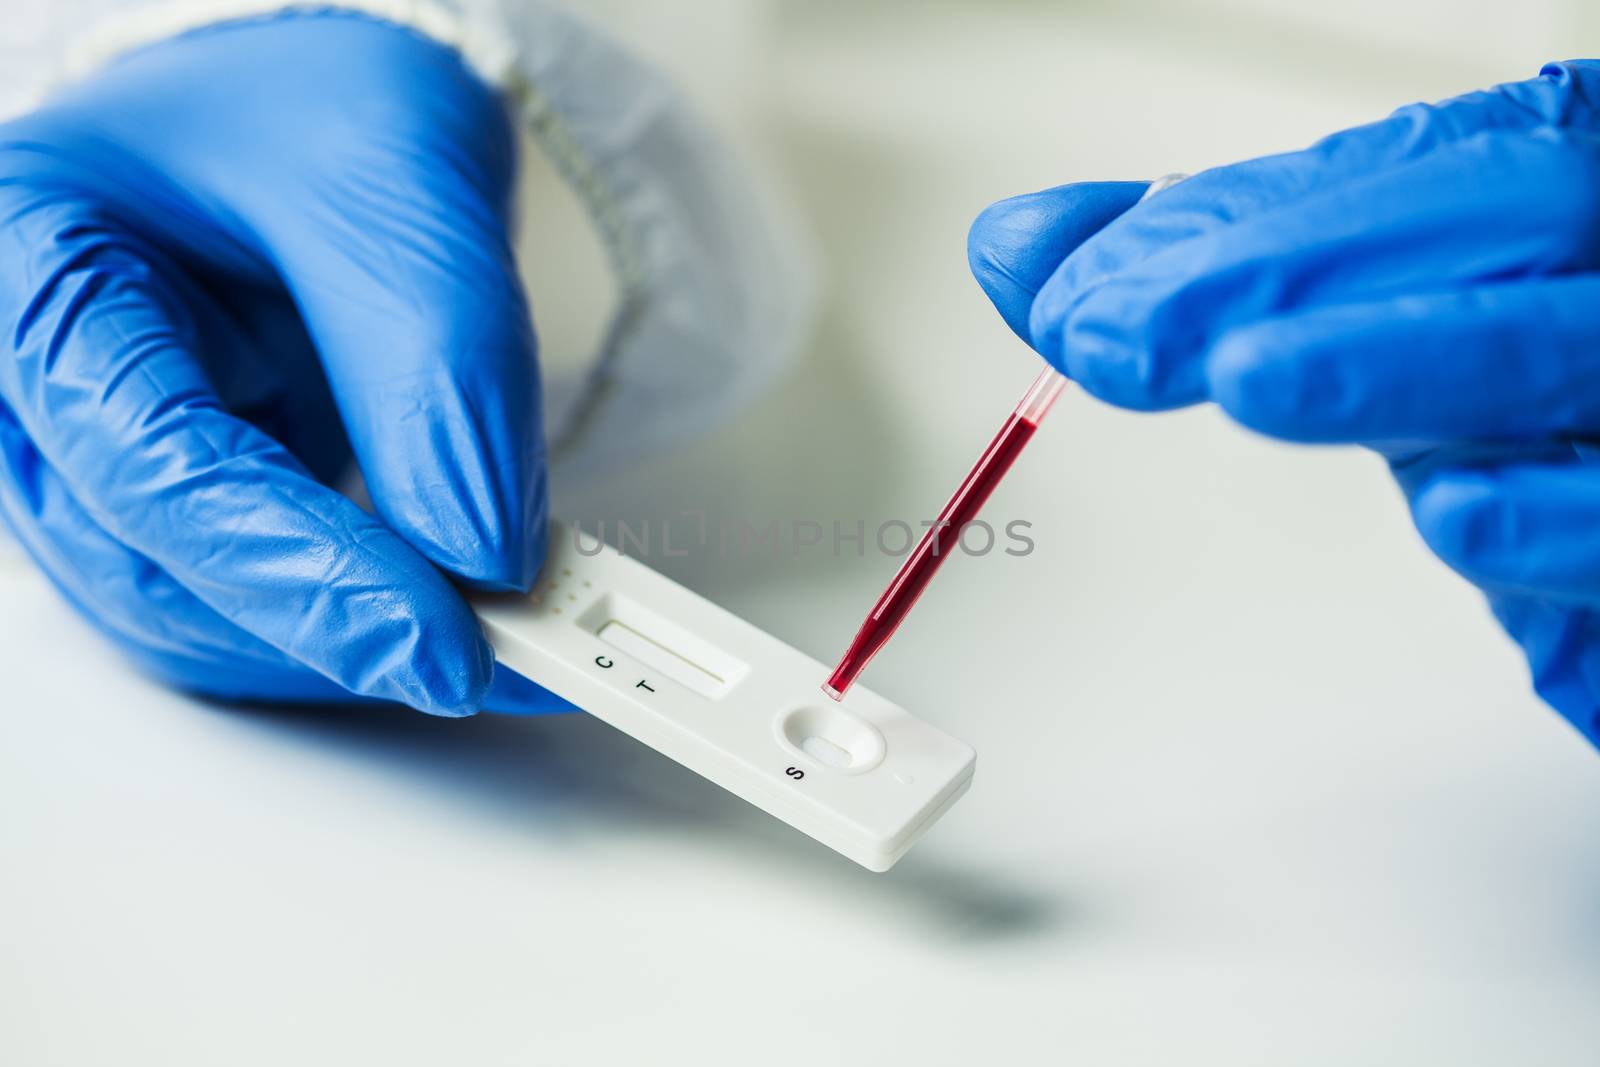 Scientist or doctor placing blood sample on Rapid Diagnostic Rest RDT cassette,medical technician performing quick fast blood PRP testing identifying antibodies for Coronavirus SARS-CoV-2 COVID-19